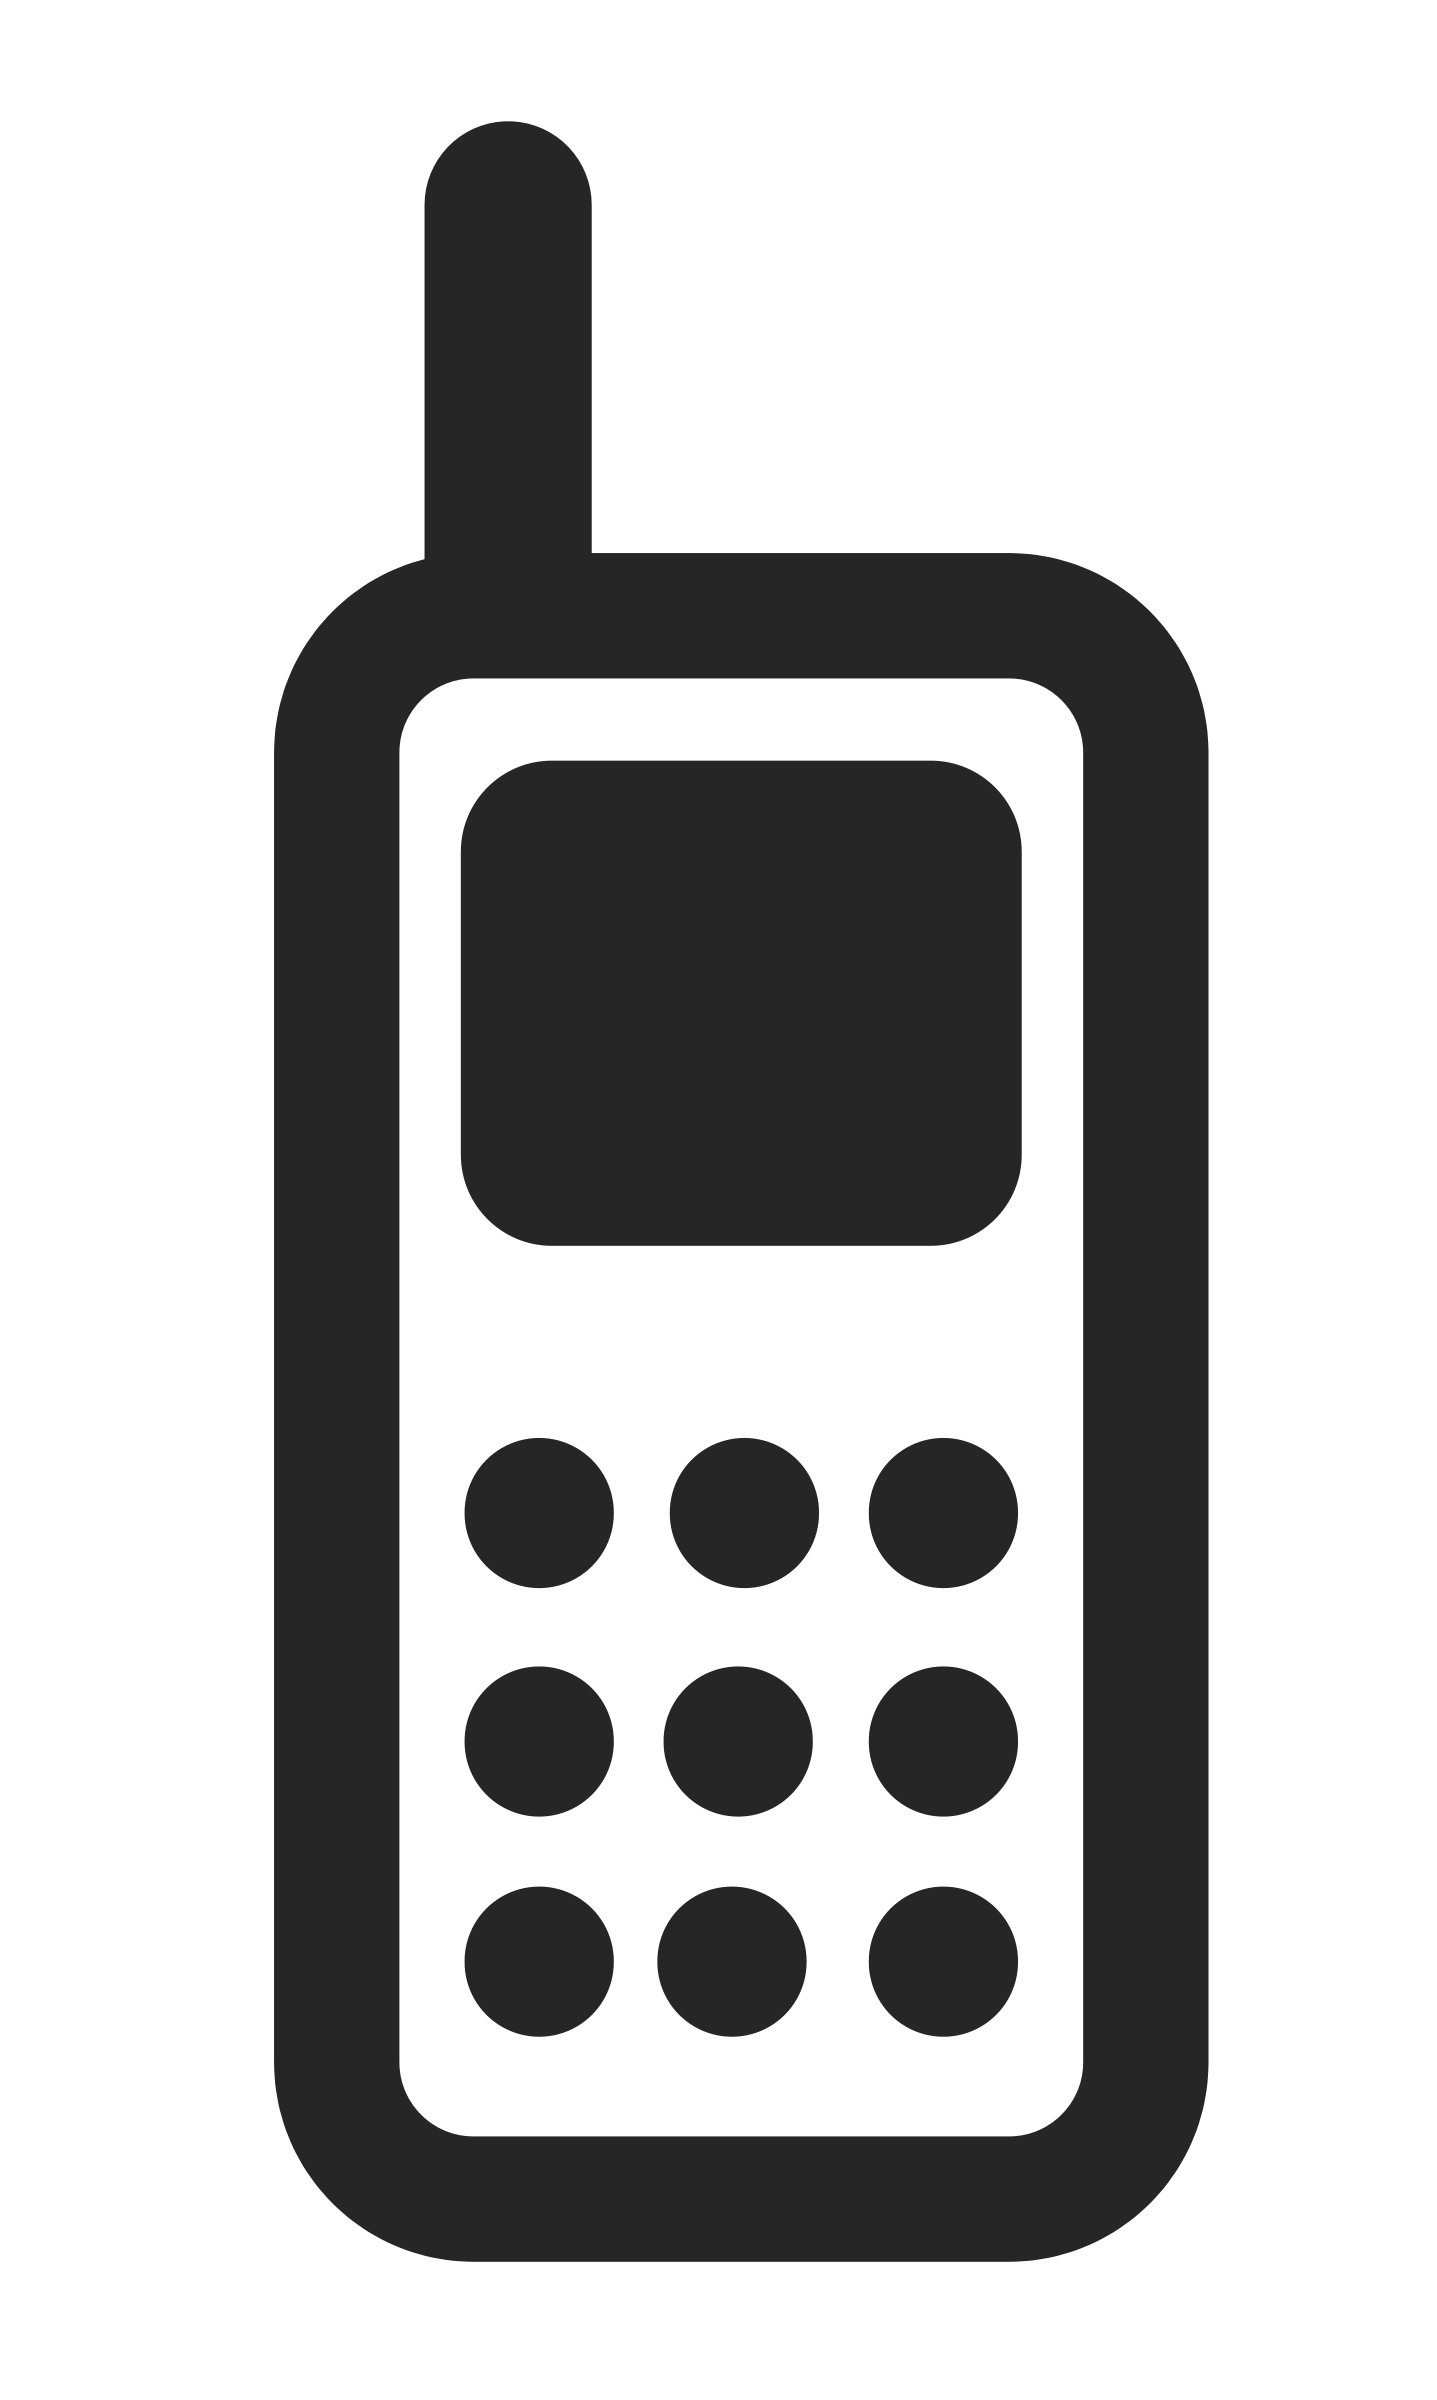 download clipart for mobile phone - photo #23